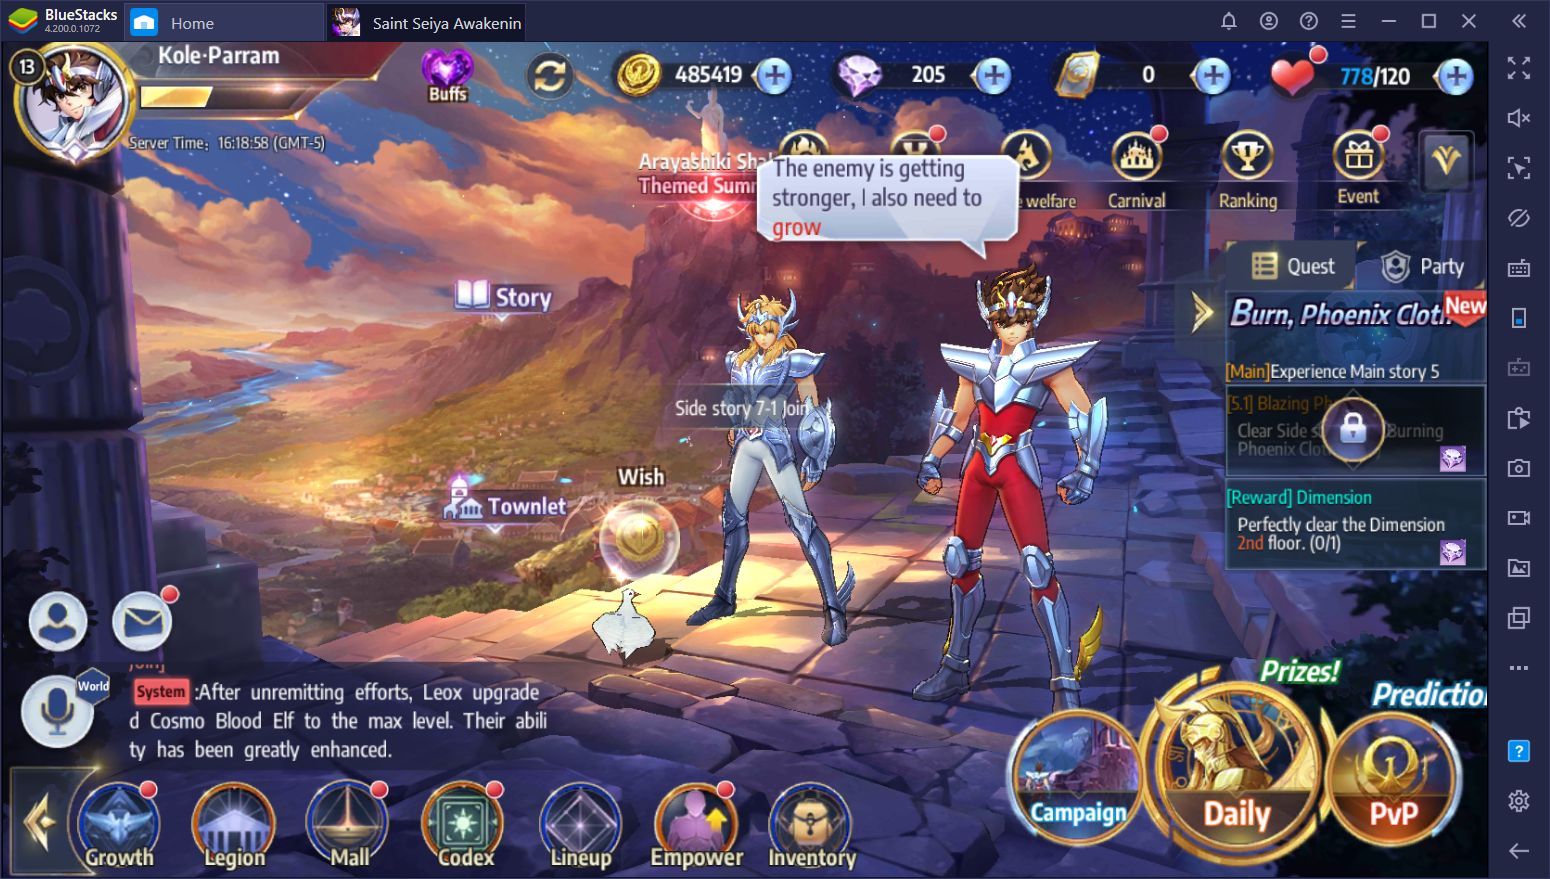 Saint Seiya Awakening on PC: From Summoning and Rerolling to Tier List - Everything You Need to Know